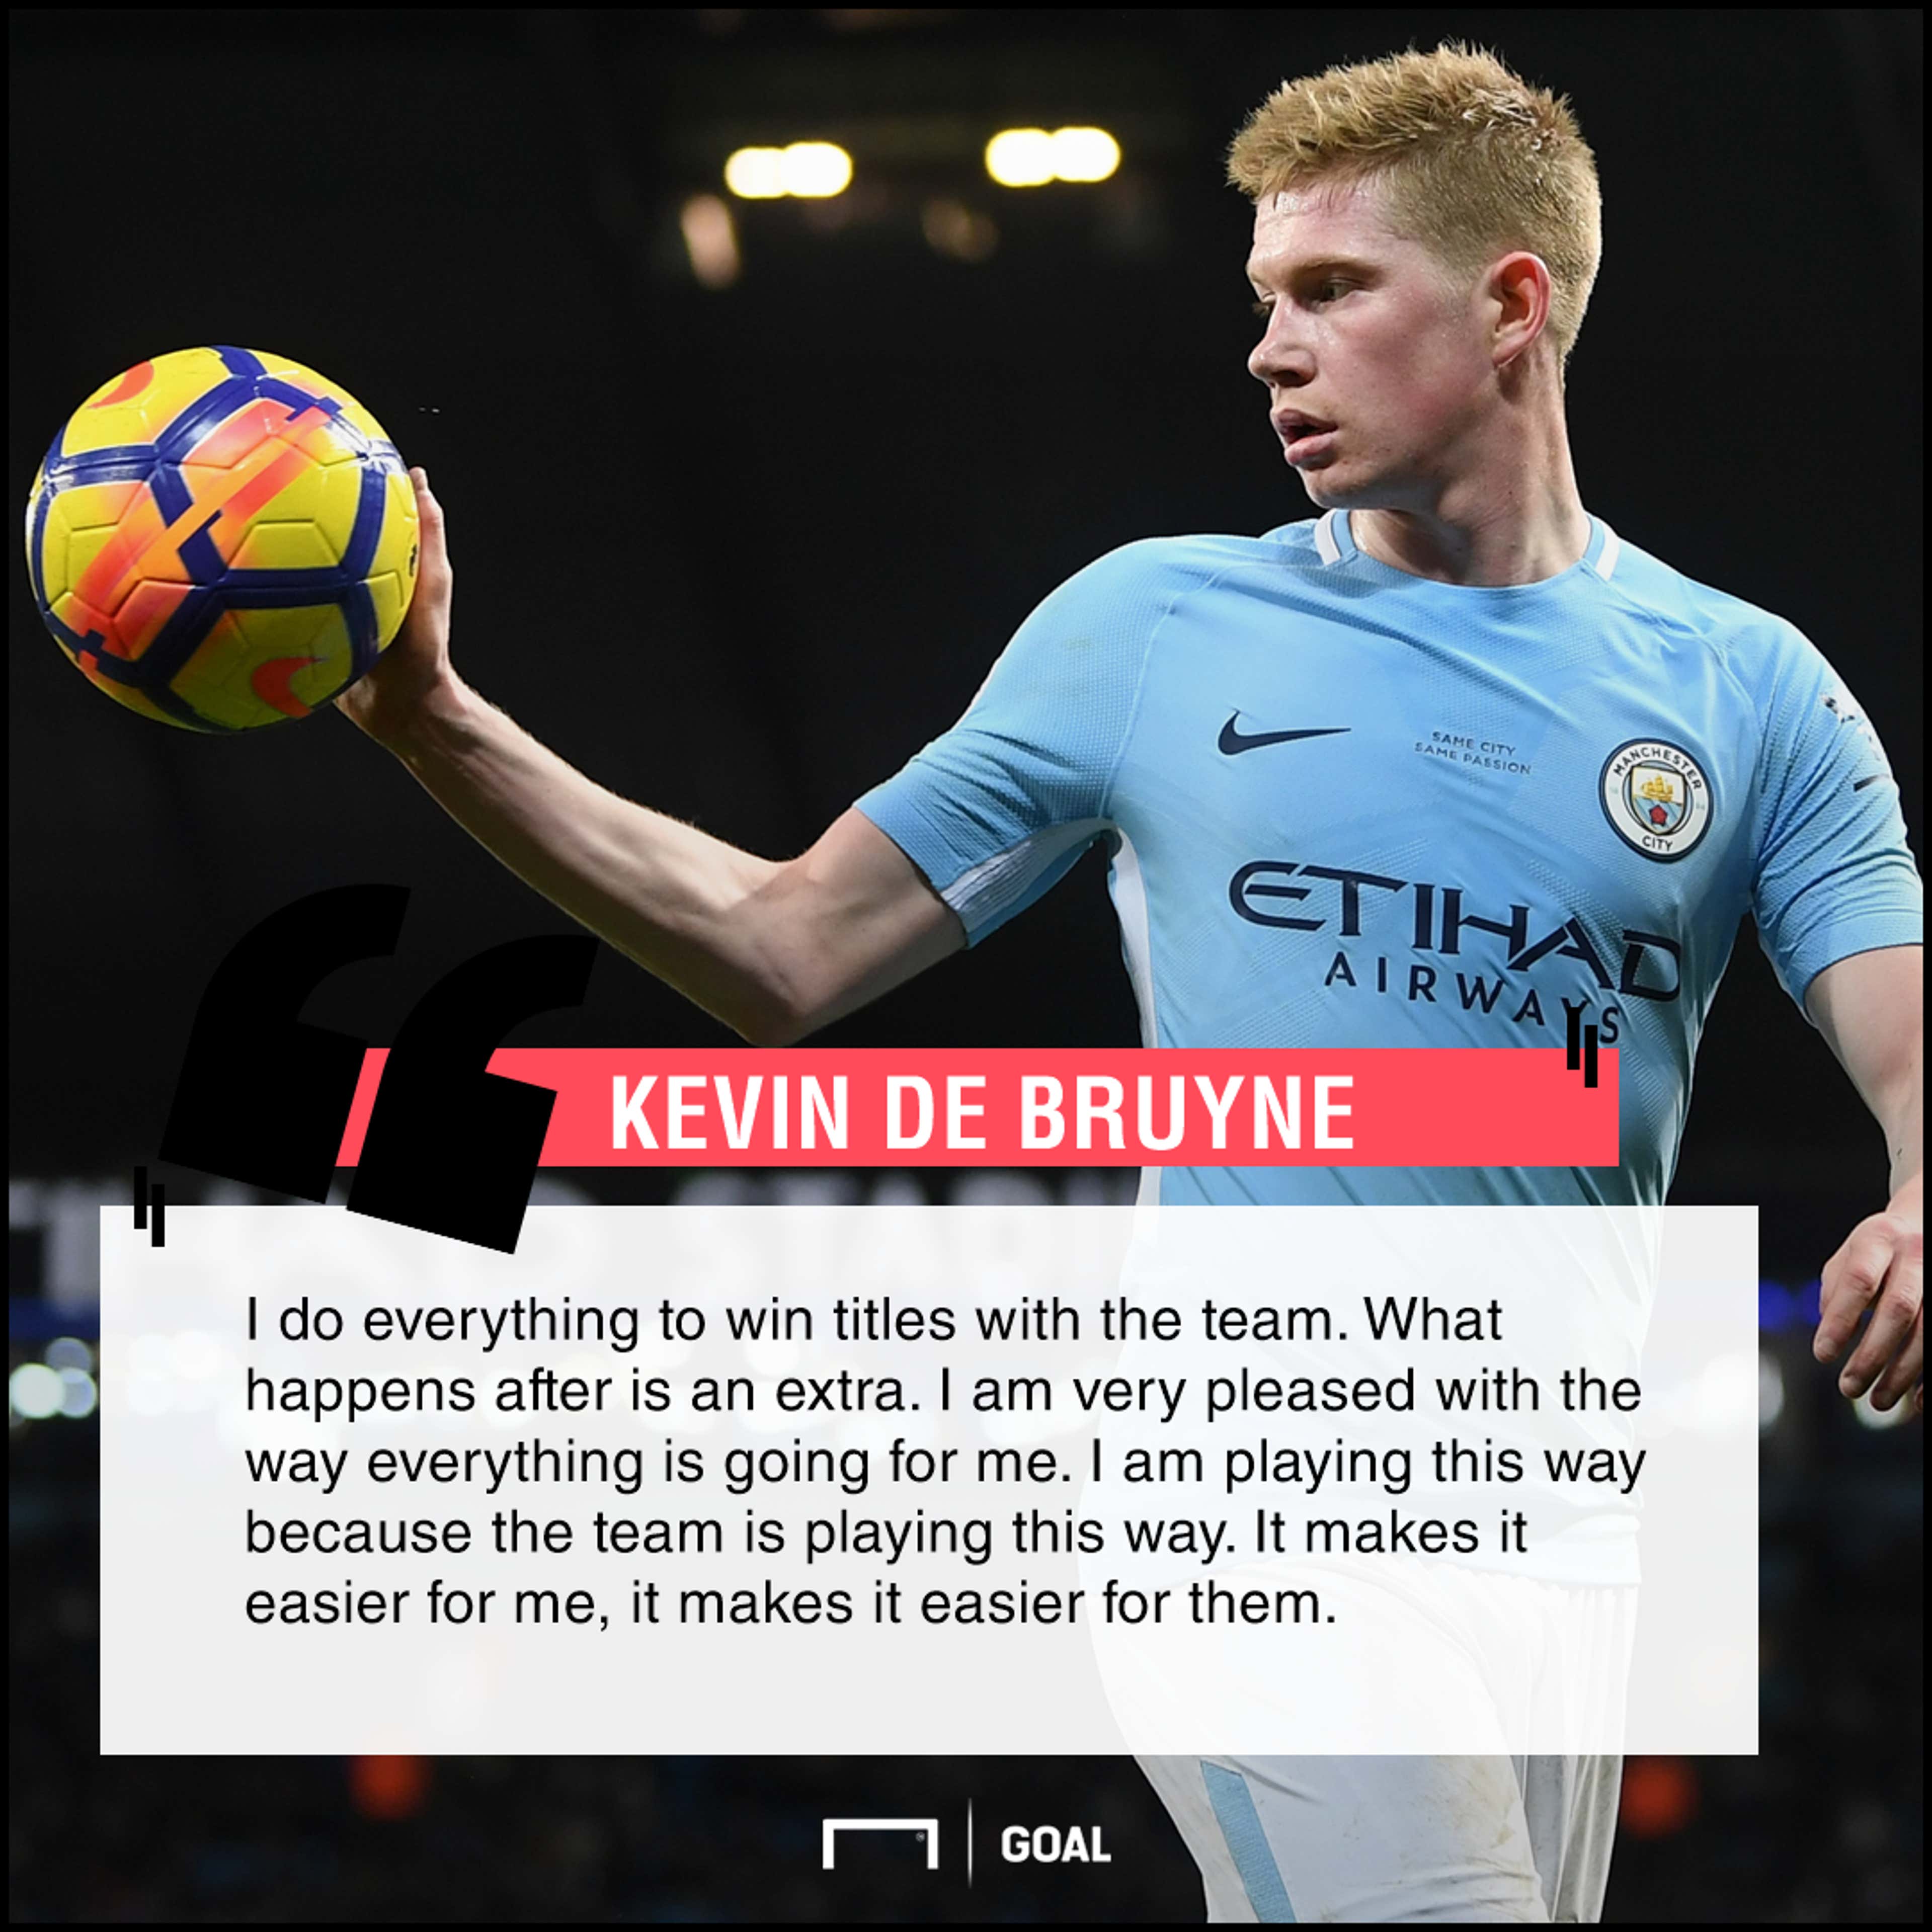 Kevin de Bruyne quote